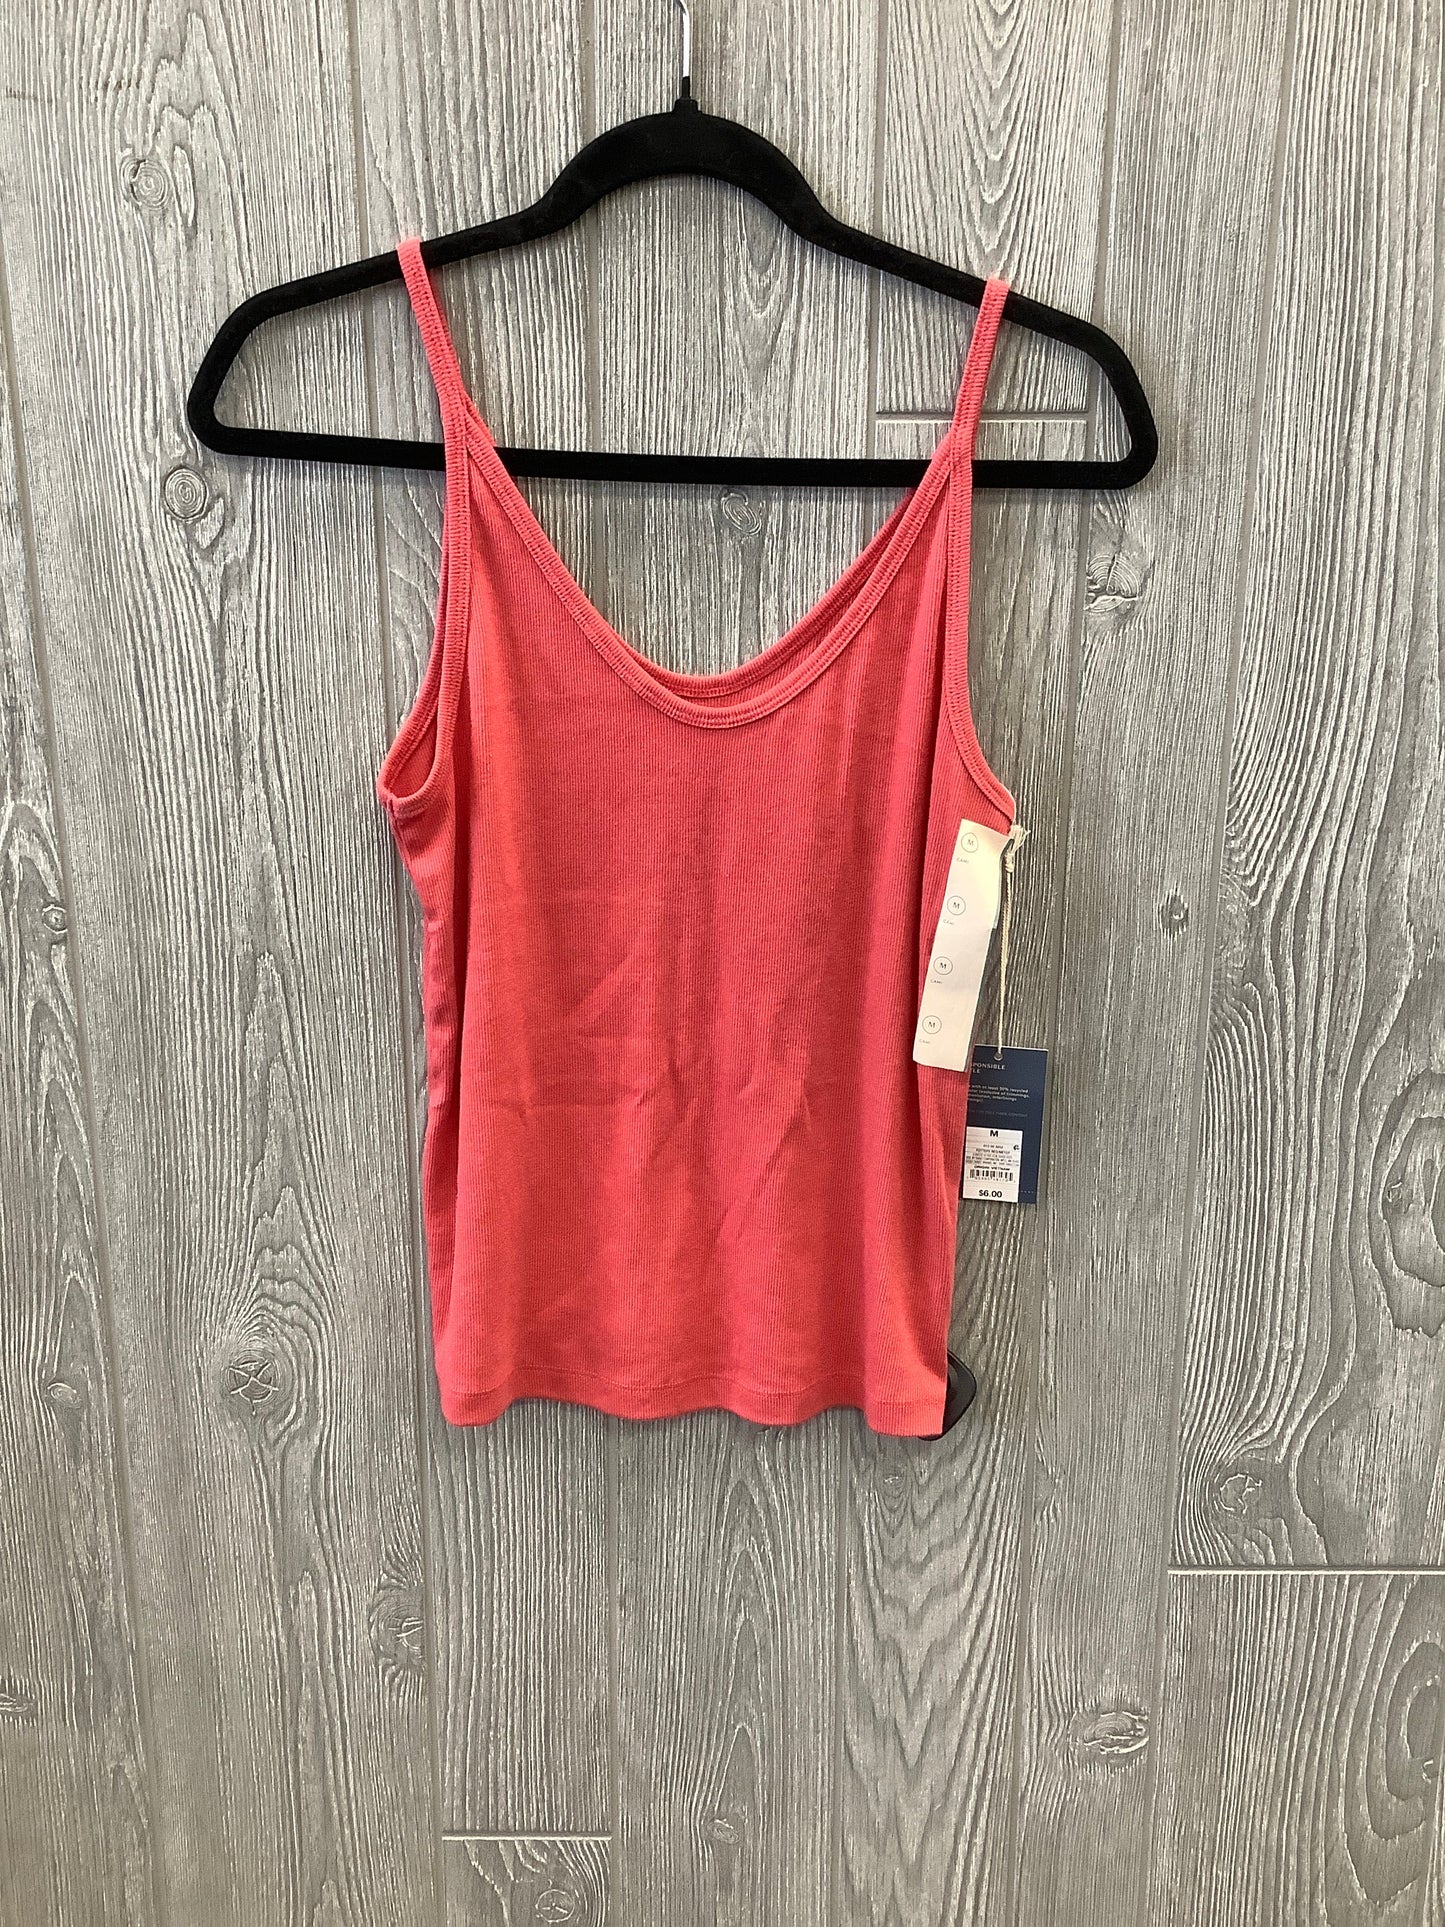 Top Cami By Universal Thread  Size: M